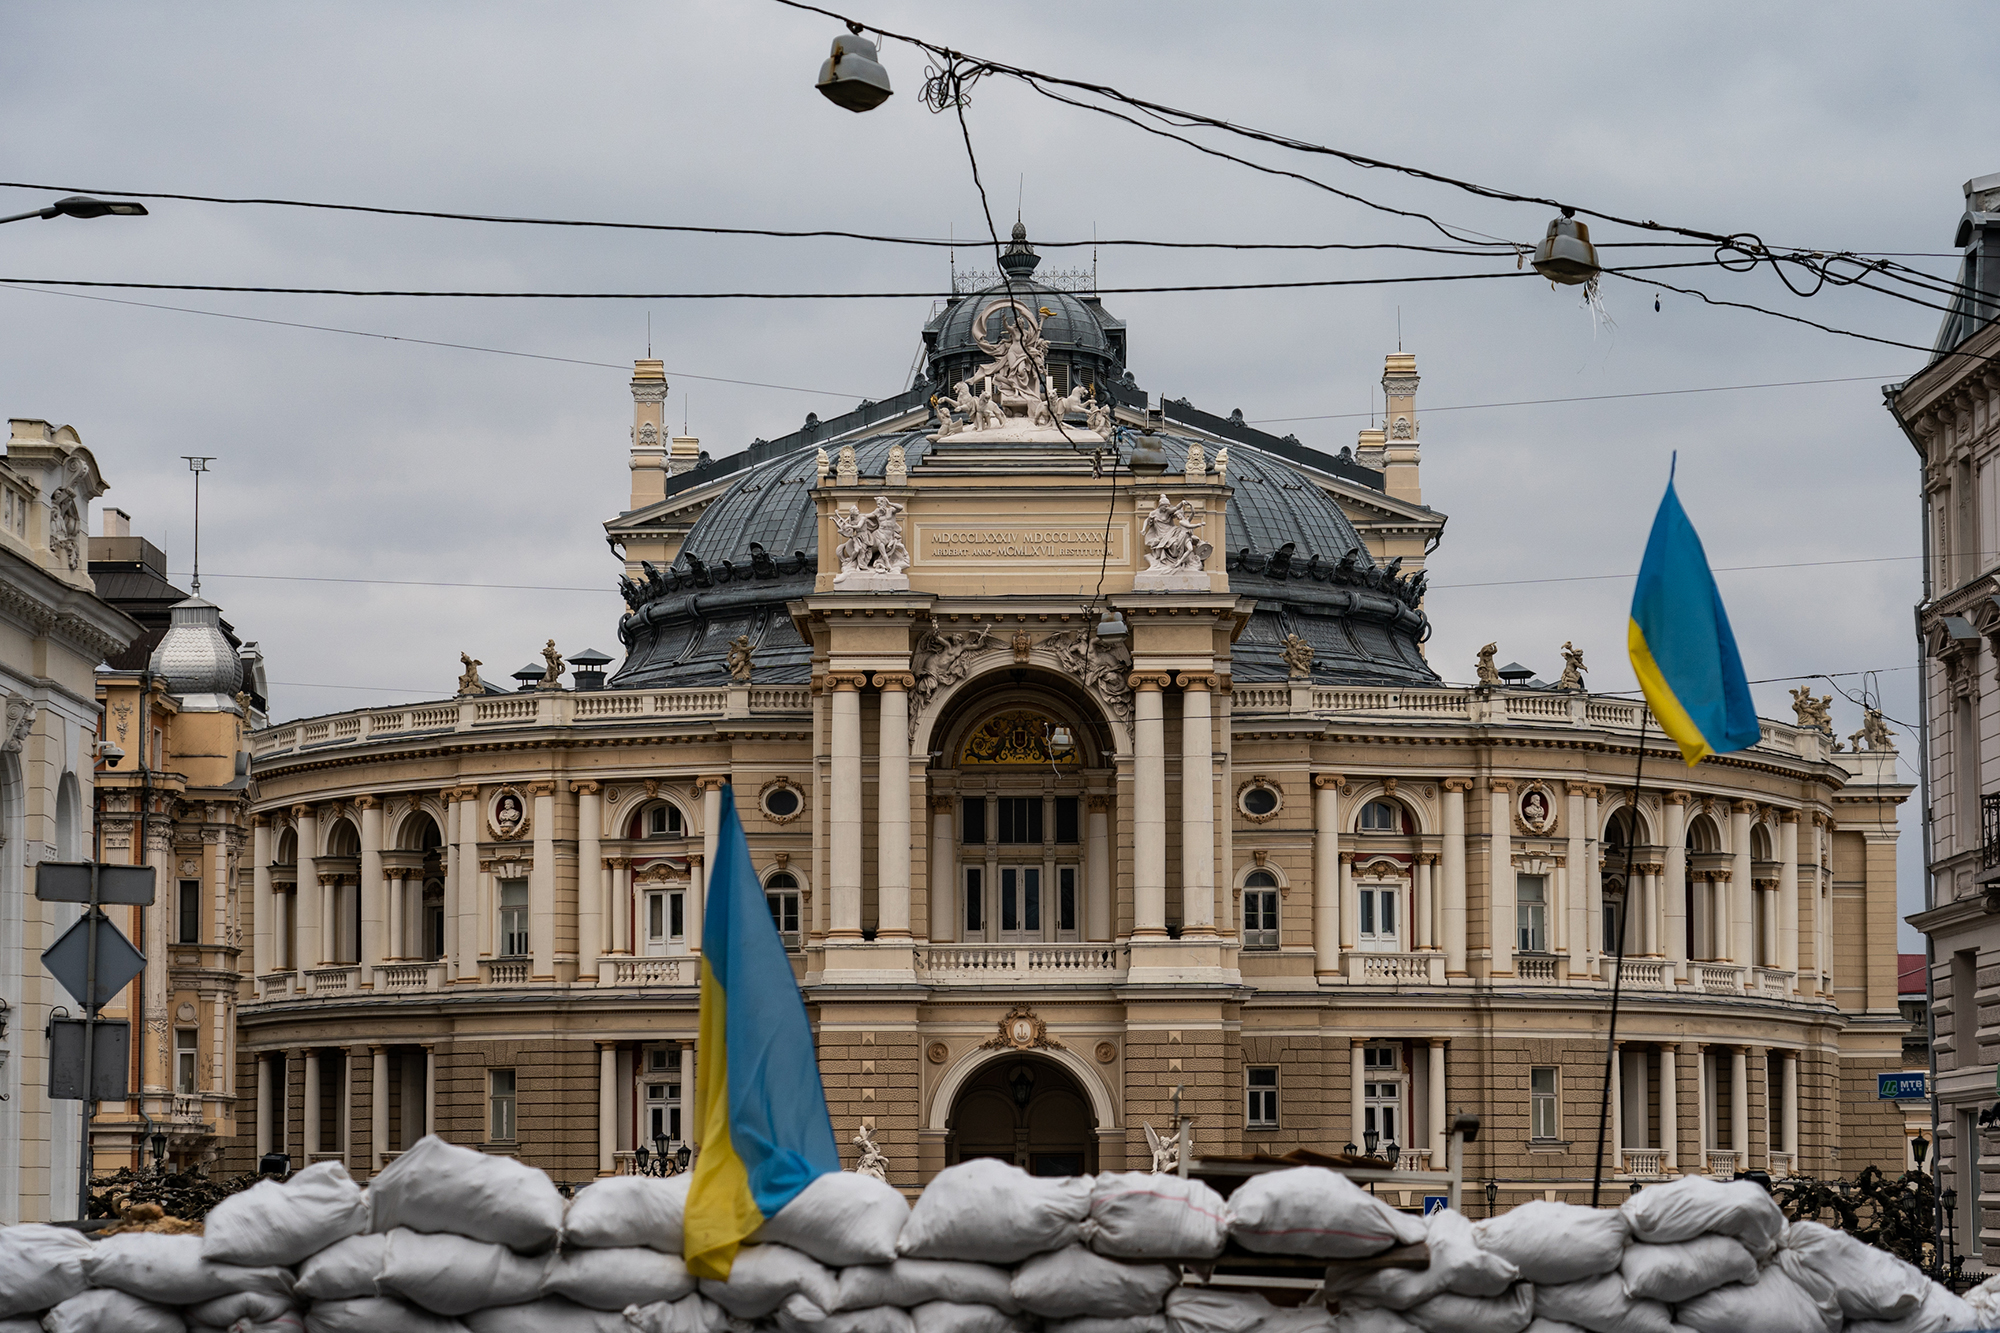 Sand bags and steel barricades are placed in a road leading up to the Odesa National Academic Opera and Ballet Theater in downtown in Odesa, Ukraine, on March 5, 2022. 